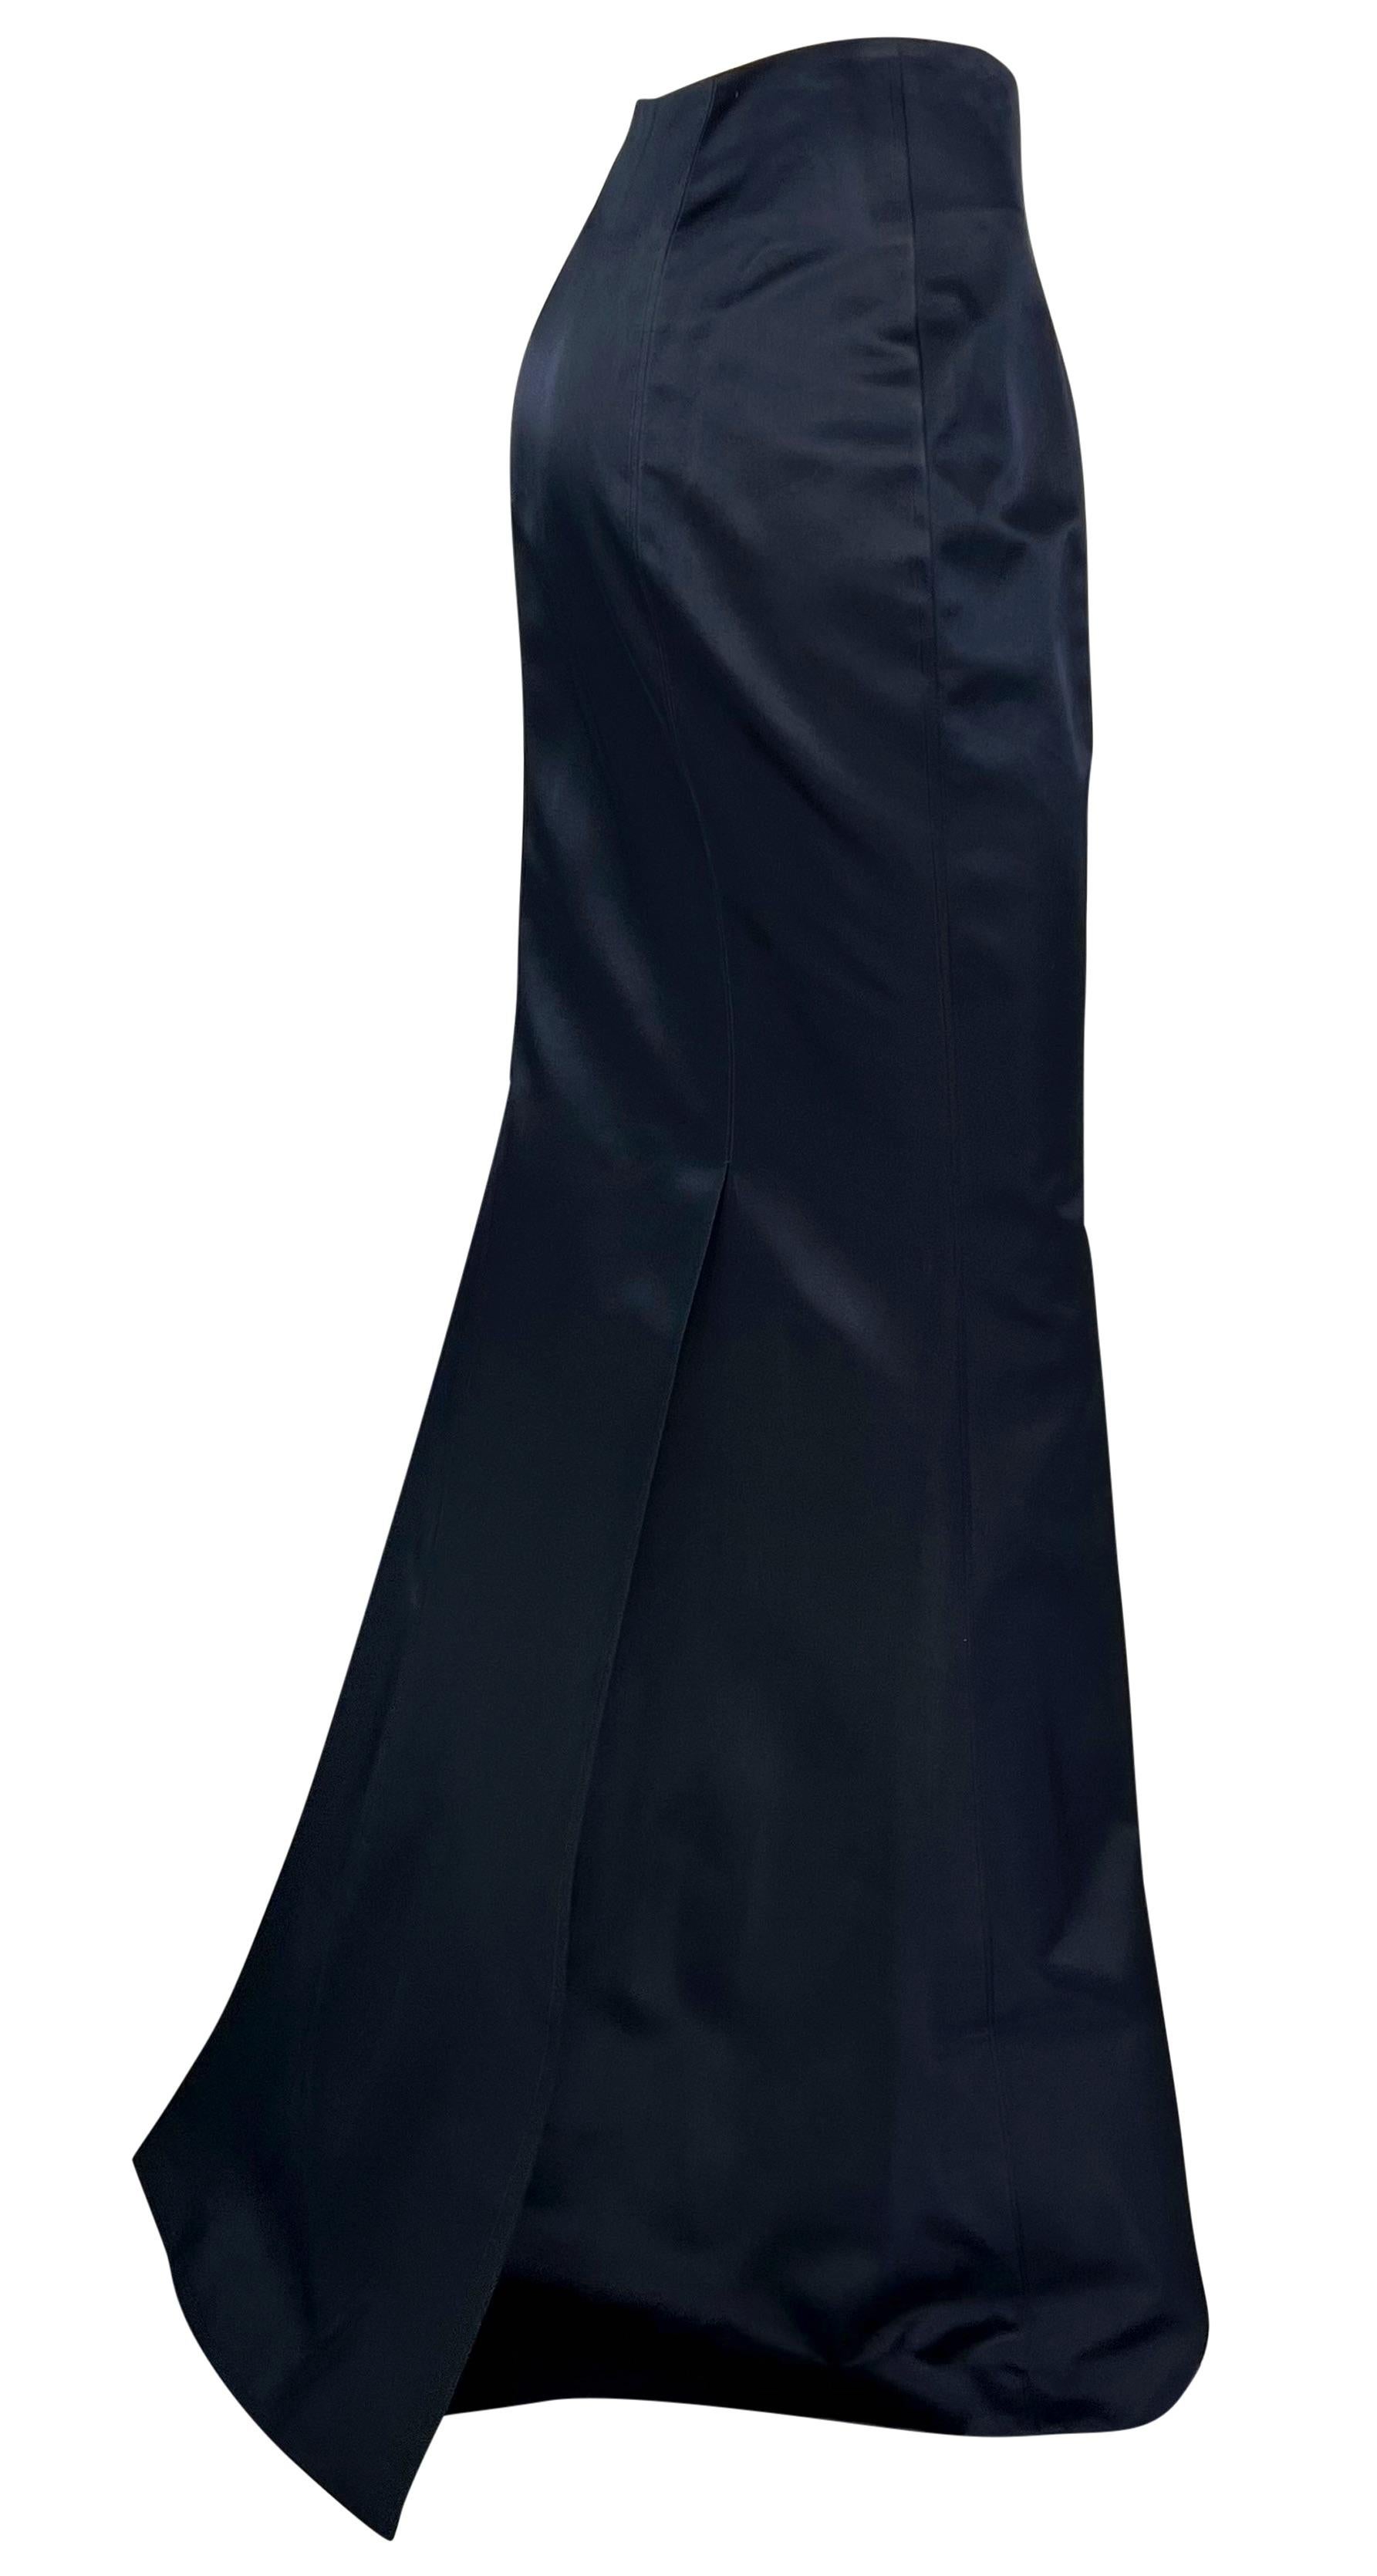 From the 1990s, this Richard Tyler navy blue satin maxi skirt epitomizes classic luxury. Constructed entirely of silk satin, this fabulous floor-length skirt features a flared hem and a small train. Never worn, with the original department store tag